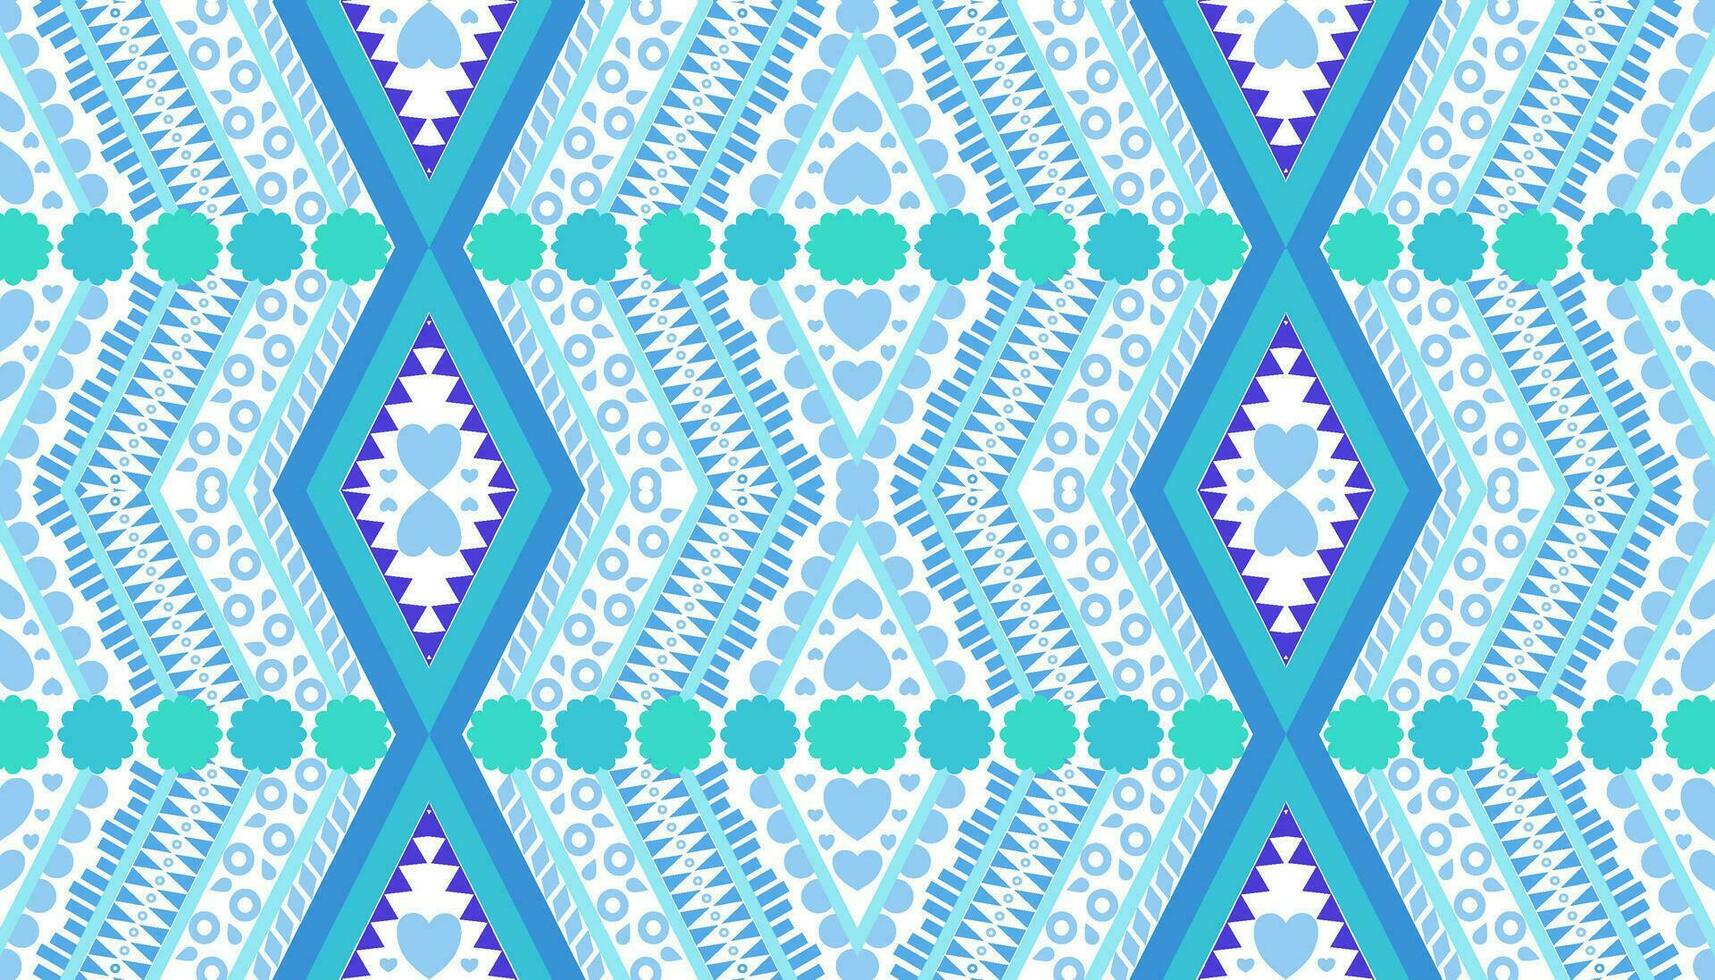 Fabric pattern in blue-green tones vector